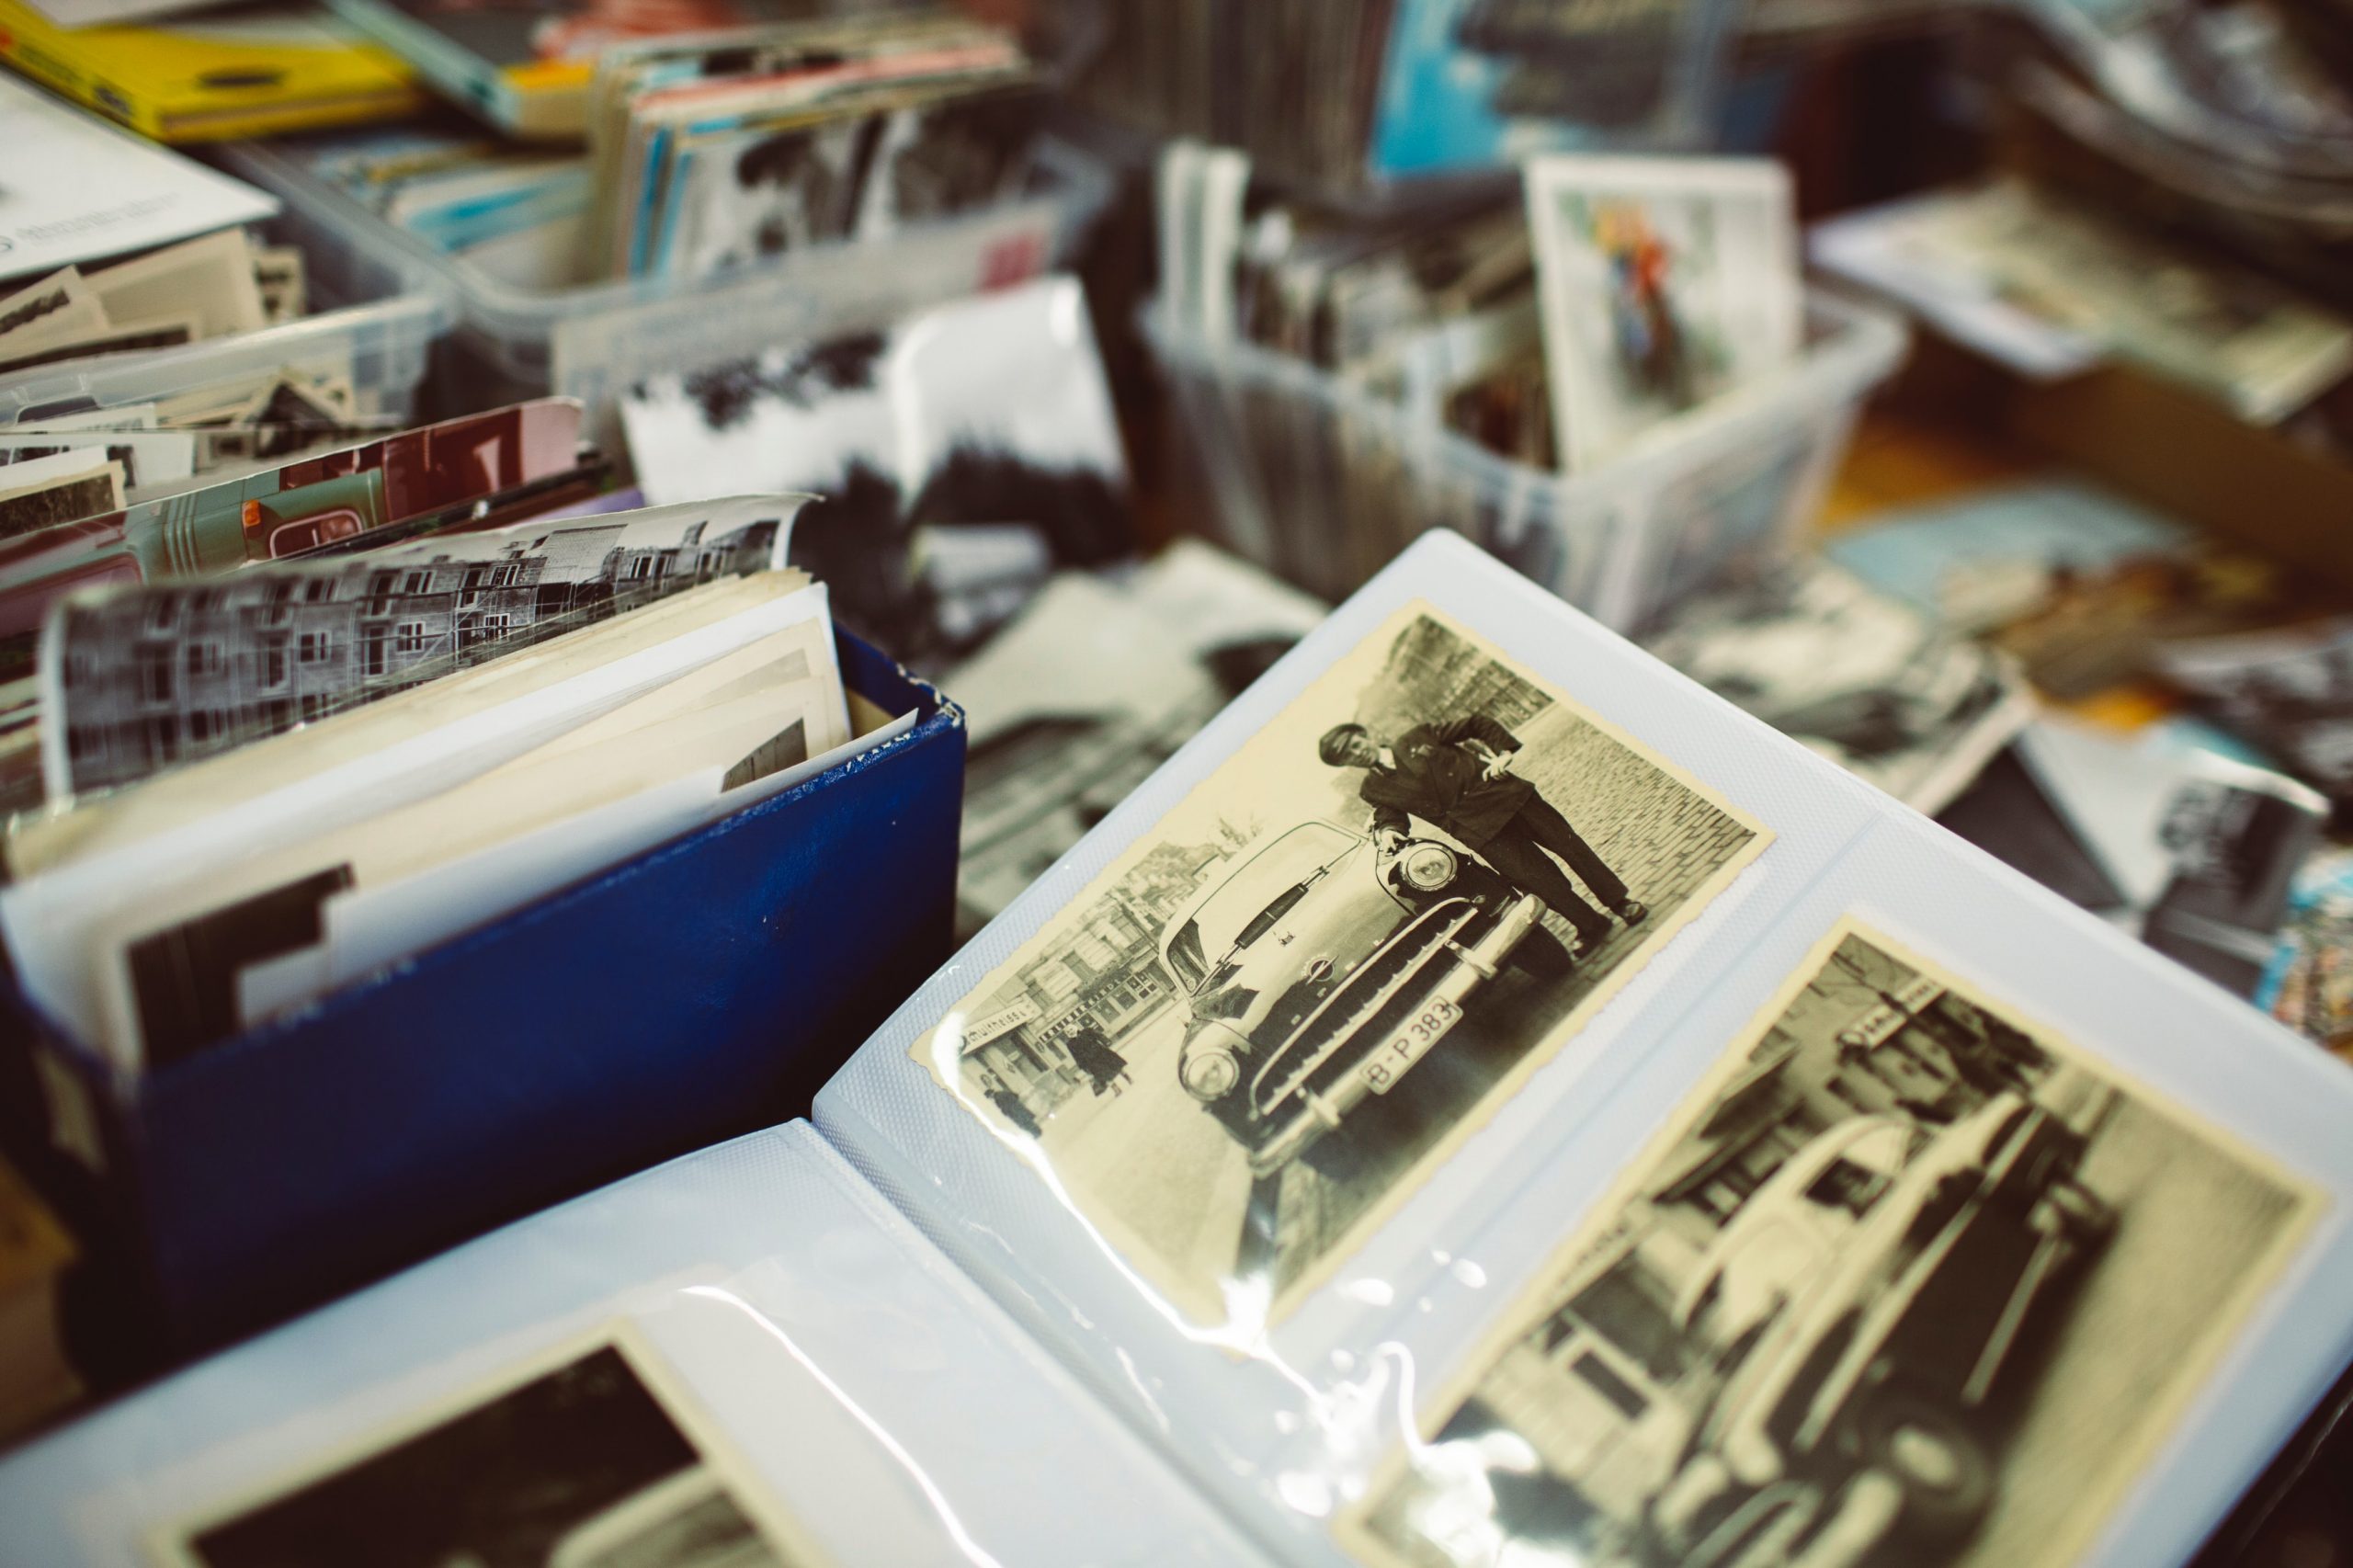 A Comprehensive Guide to Organize, Store, & Preserve your Old Photos (in 3 Easy Steps!)